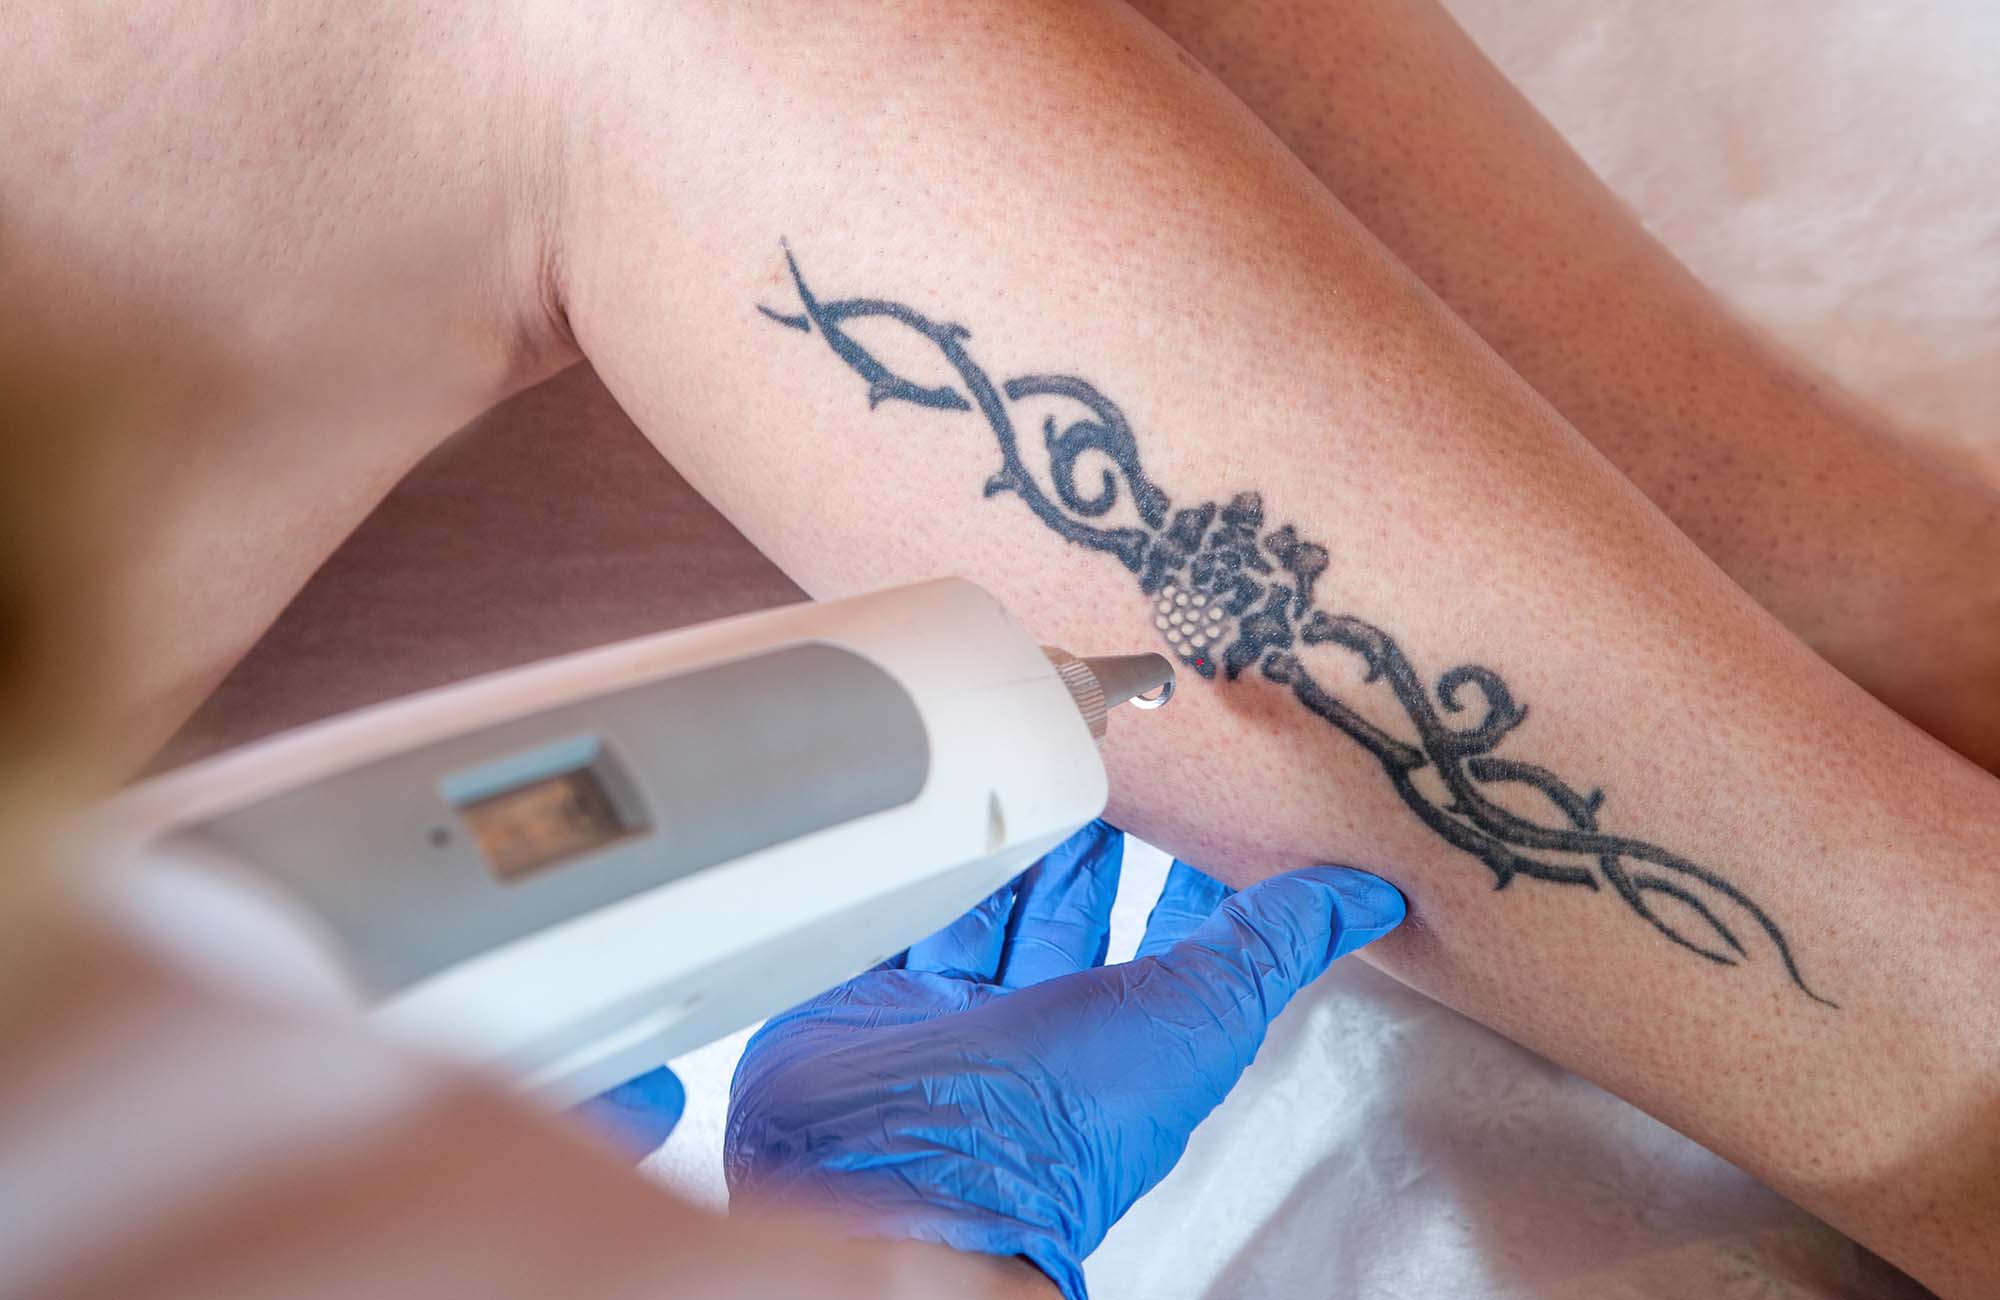 laser tattoo removal from leg